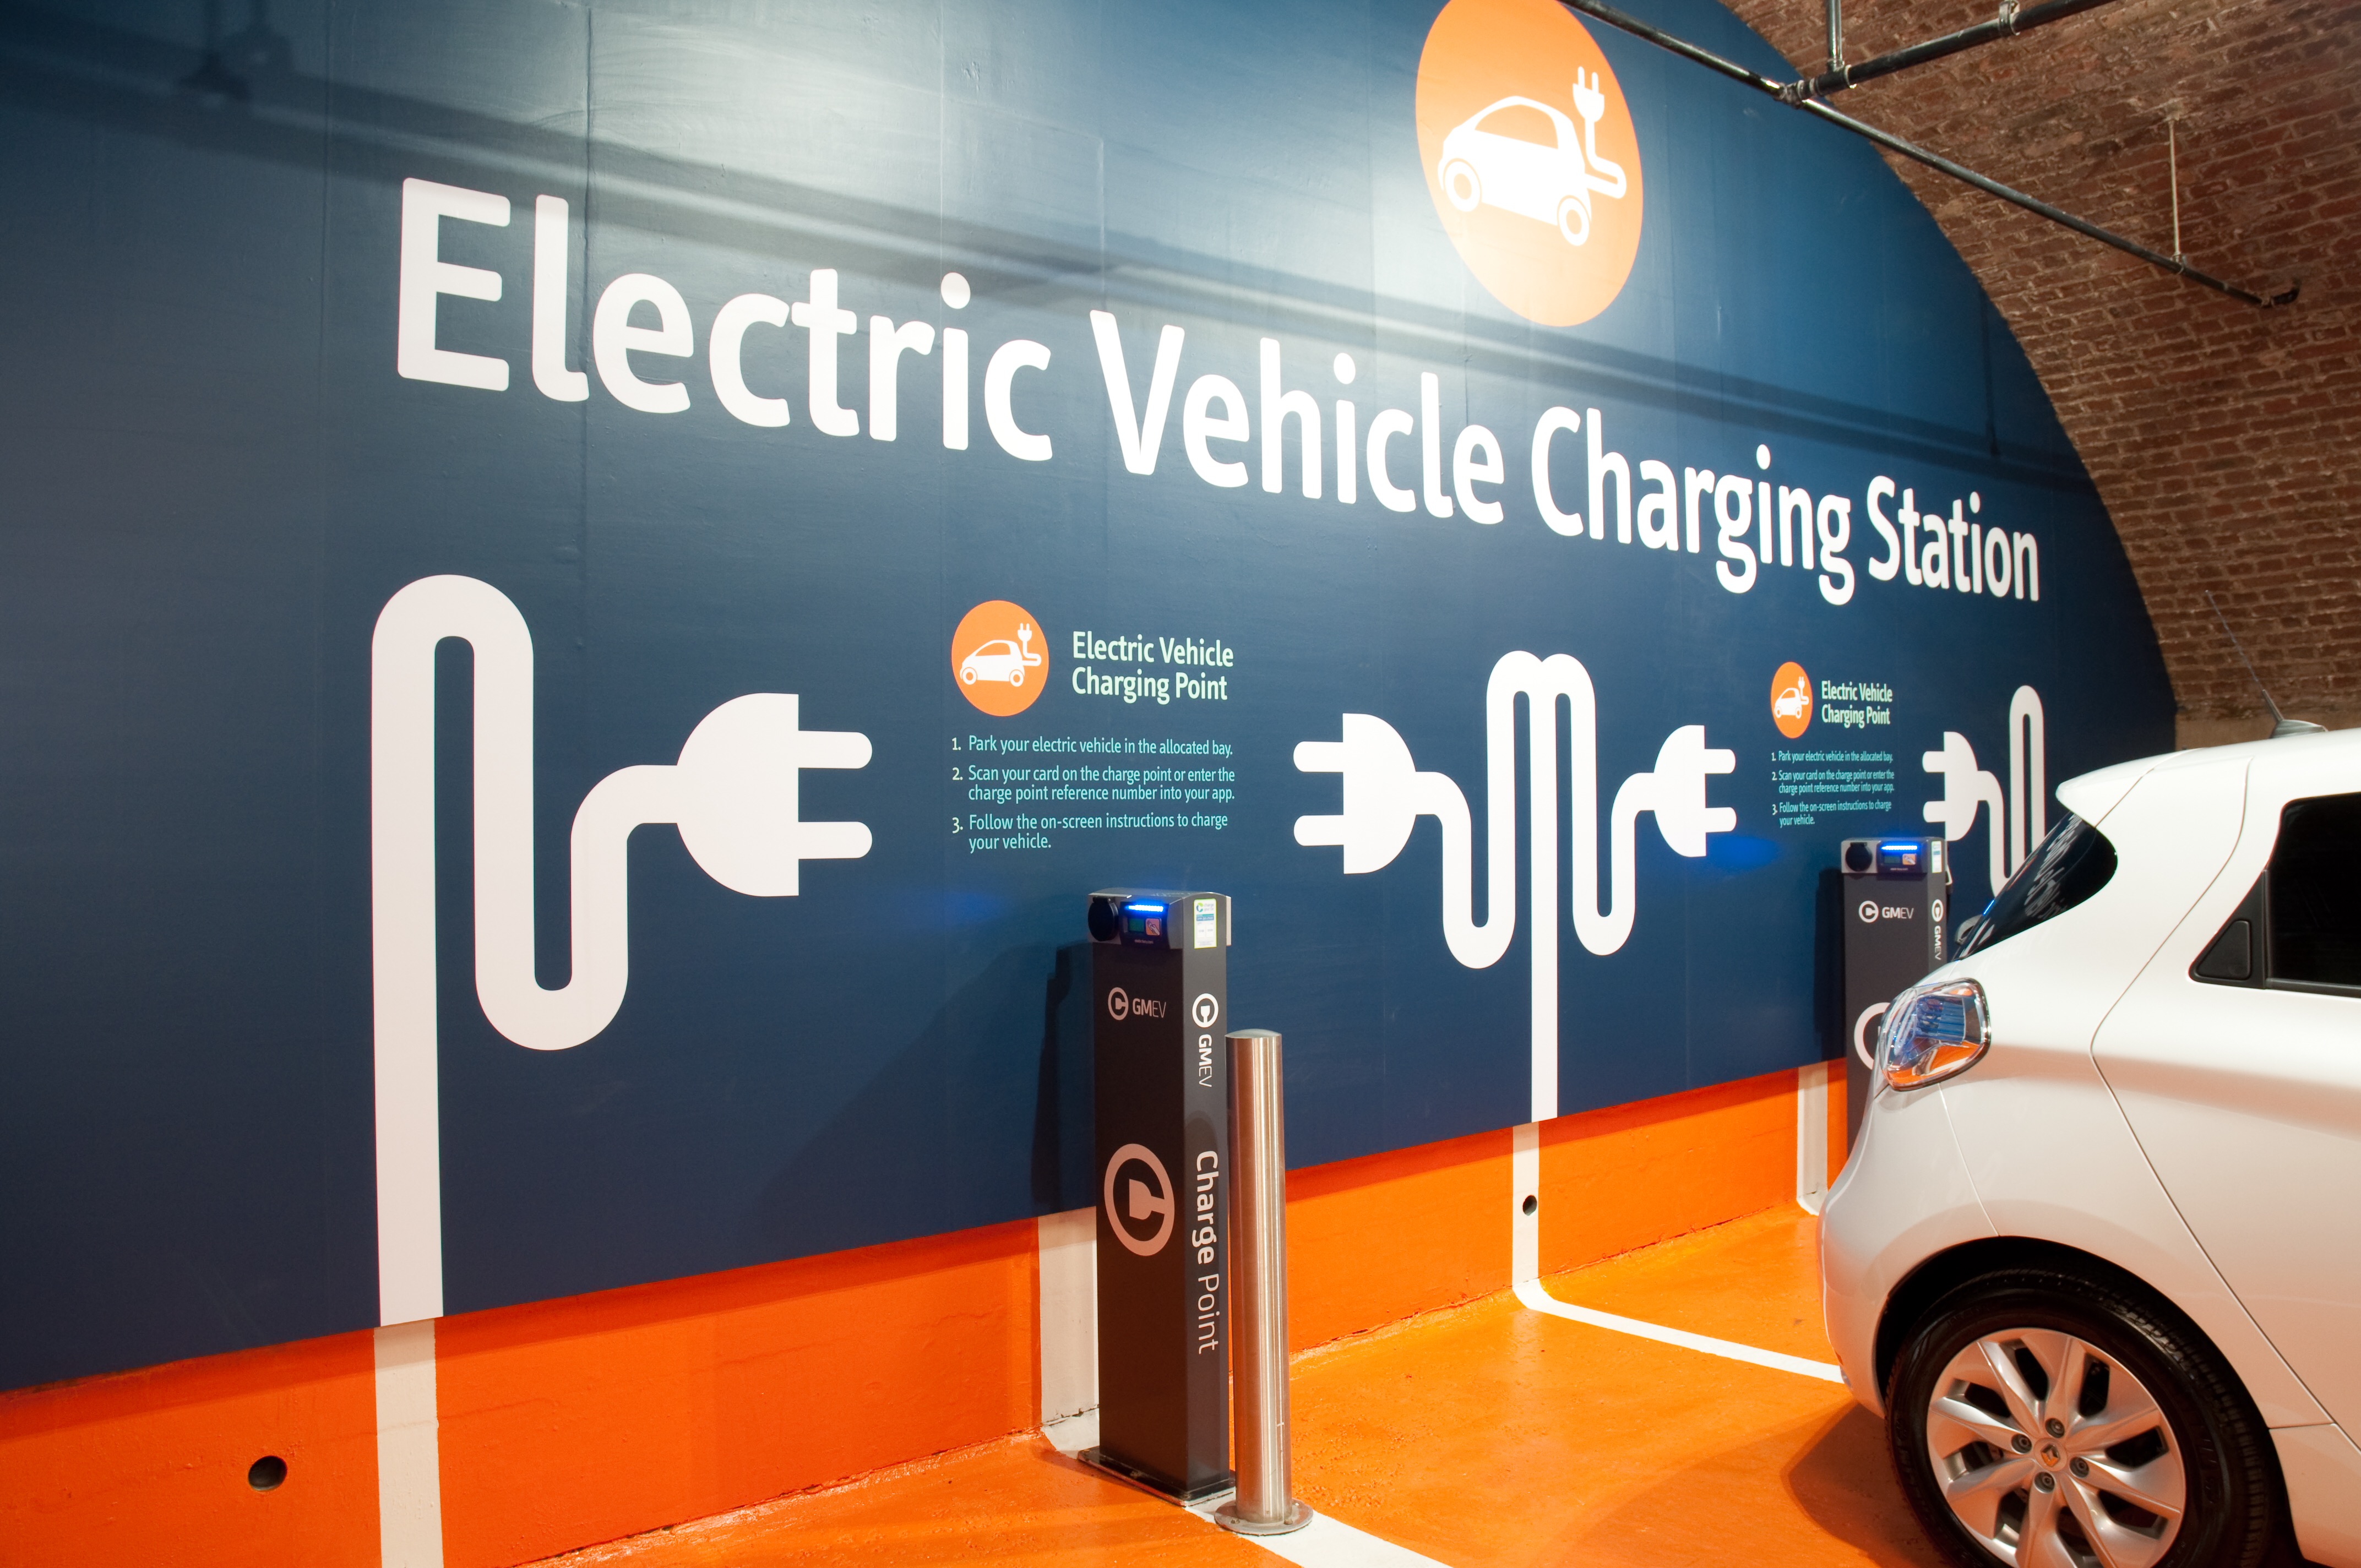 Electric vehicle use in Greater Manchester has rocketed over the past